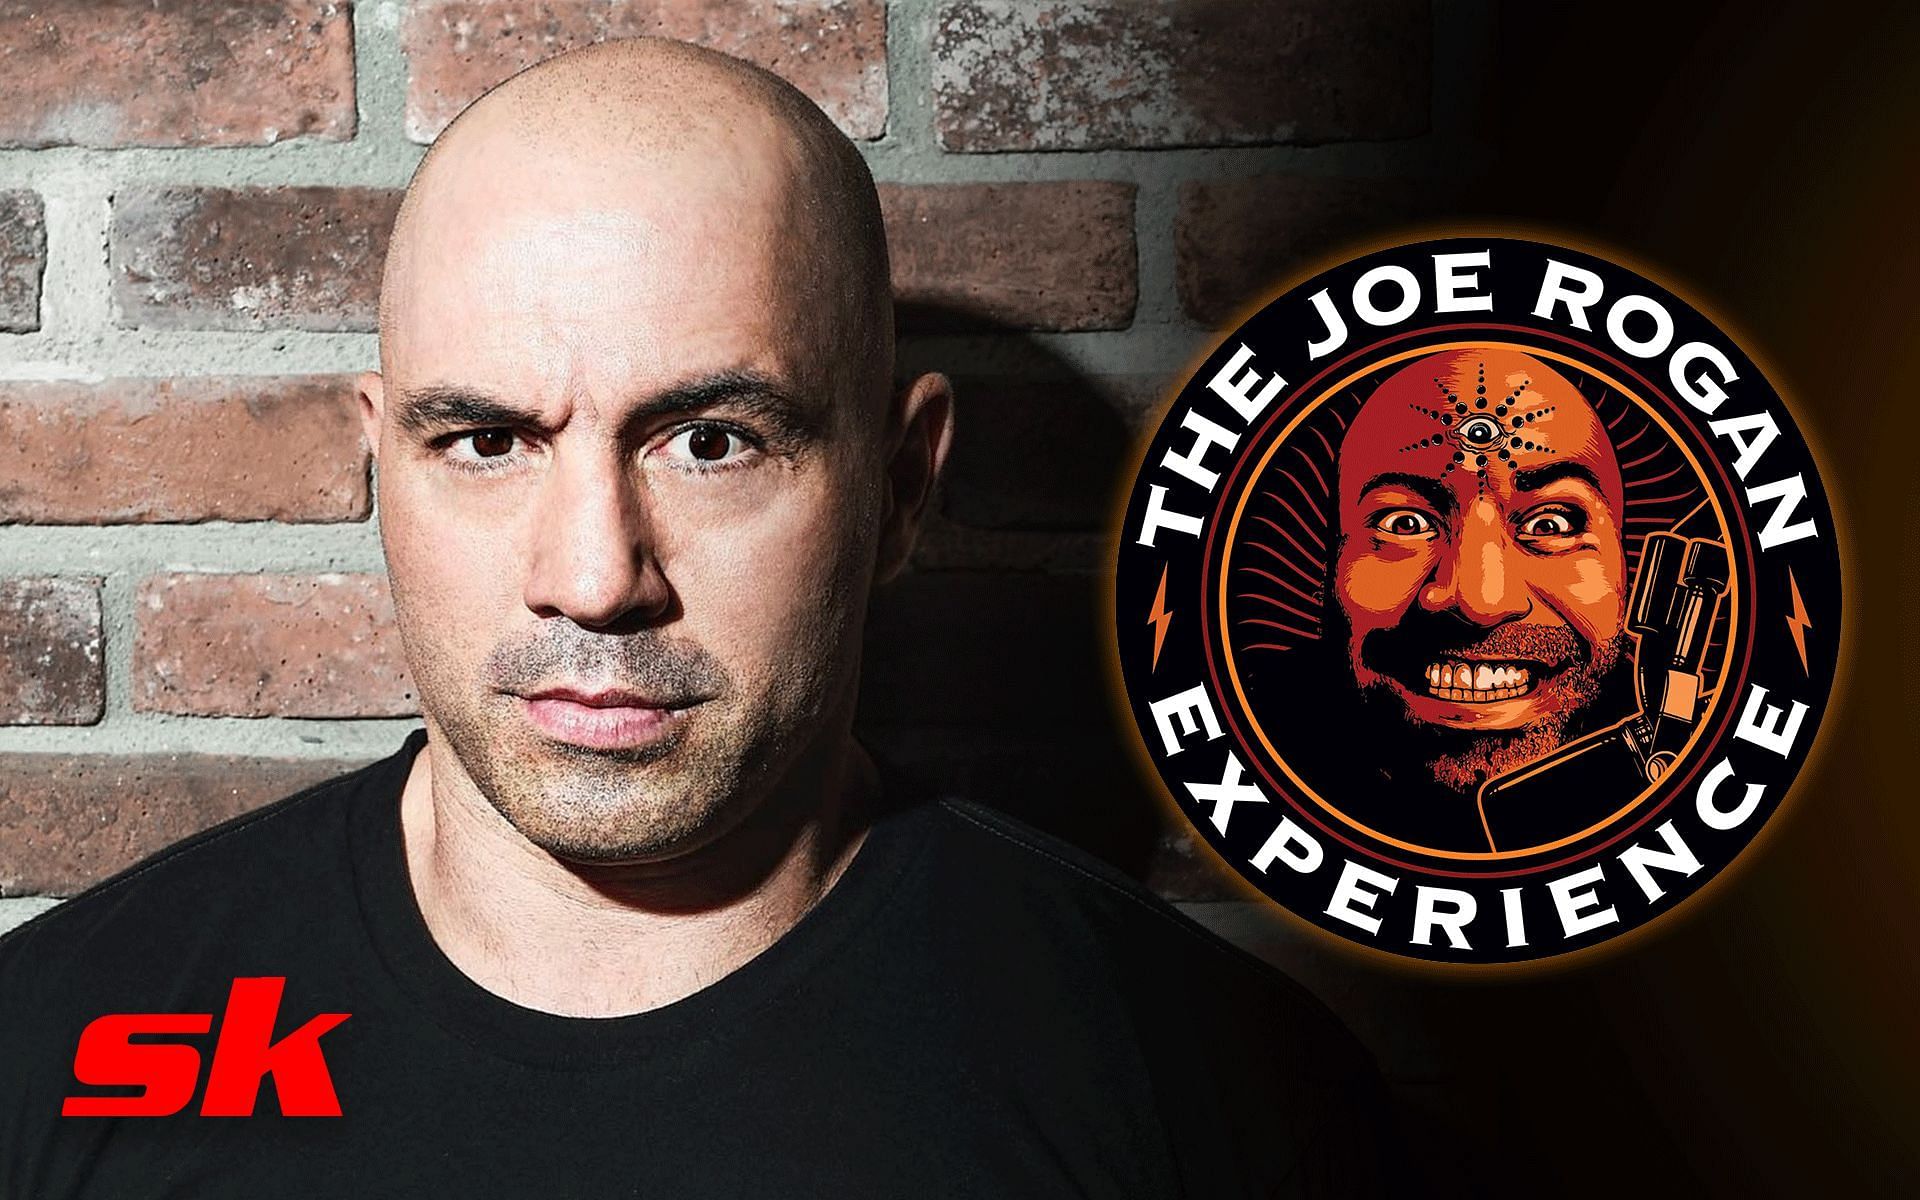 Joe Rogan podcast How many listeners does Joe Rogan have? Find out